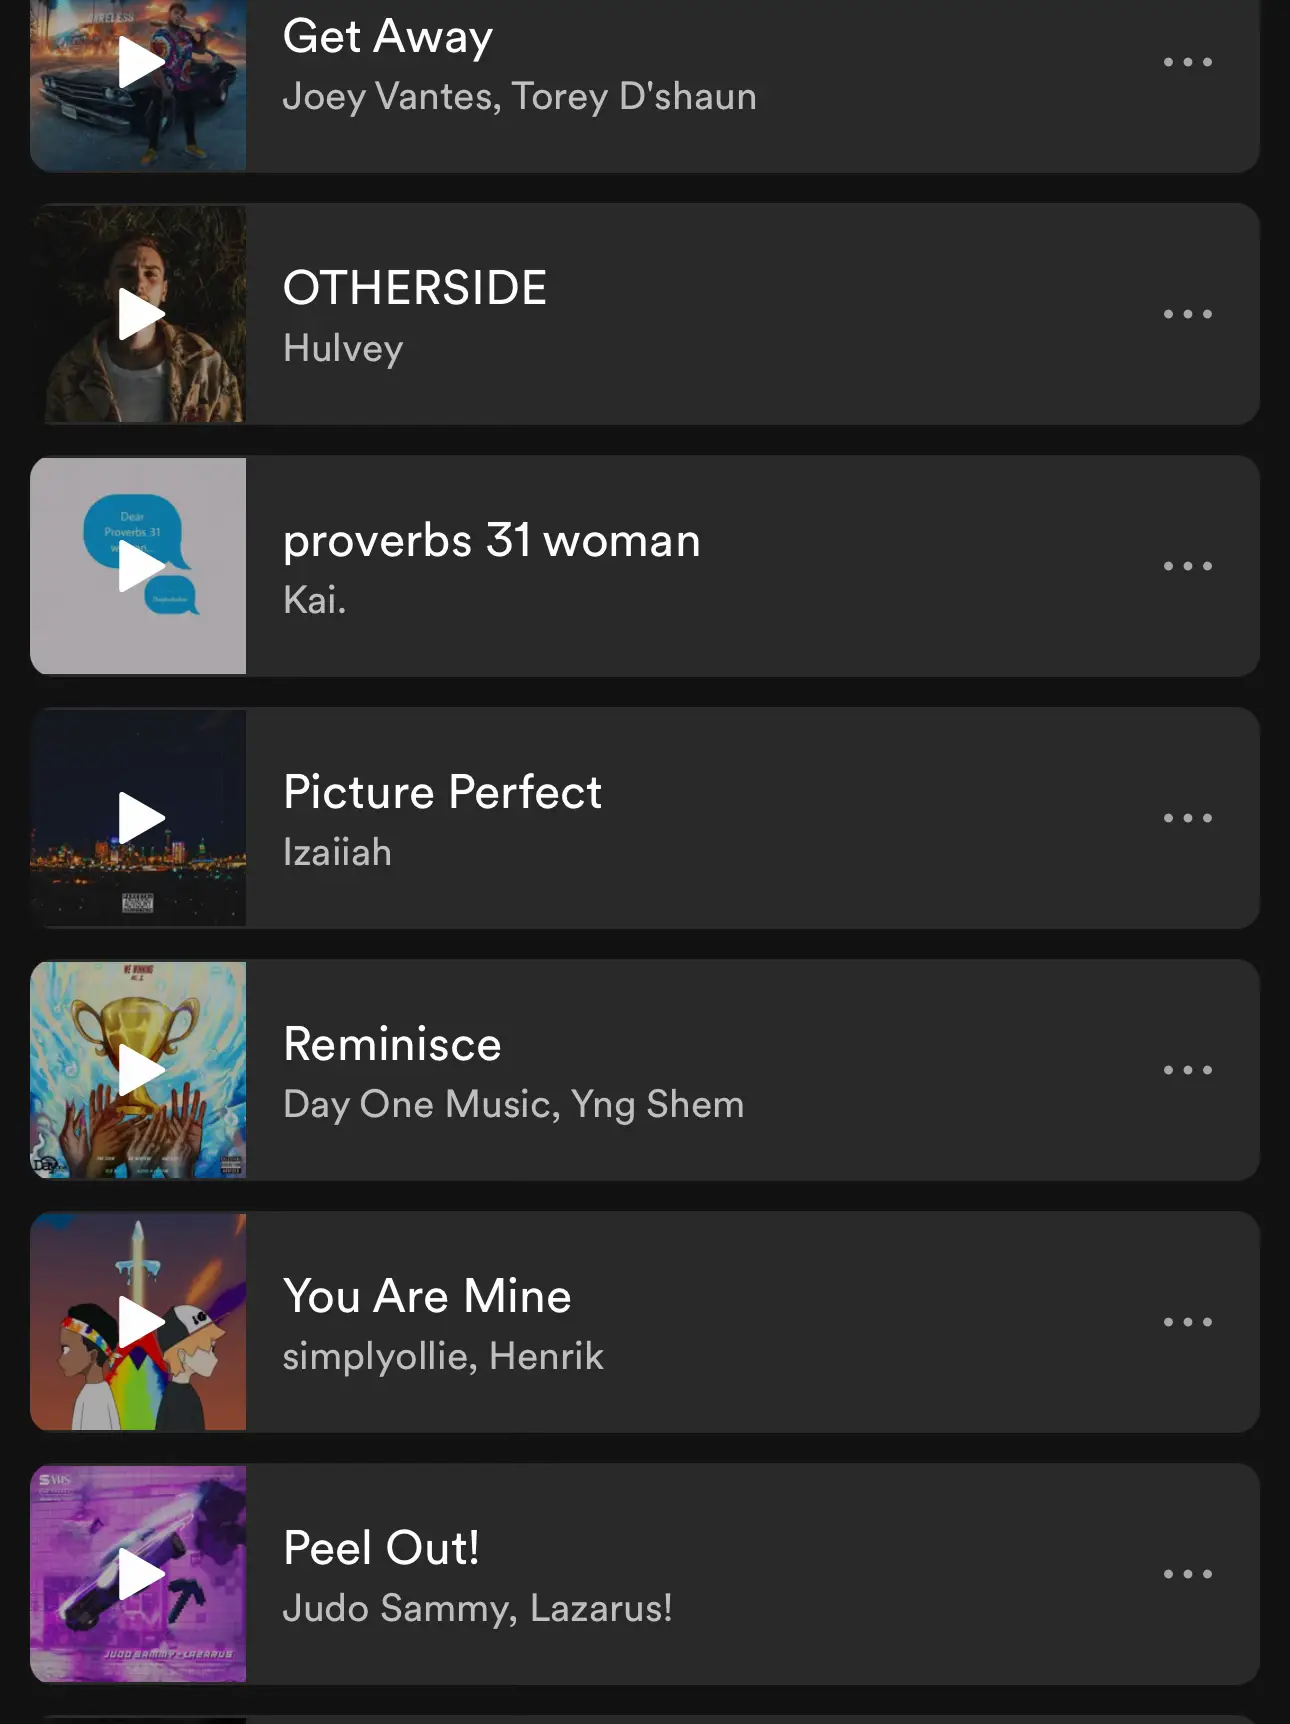  A list of songs with a picture of a woman